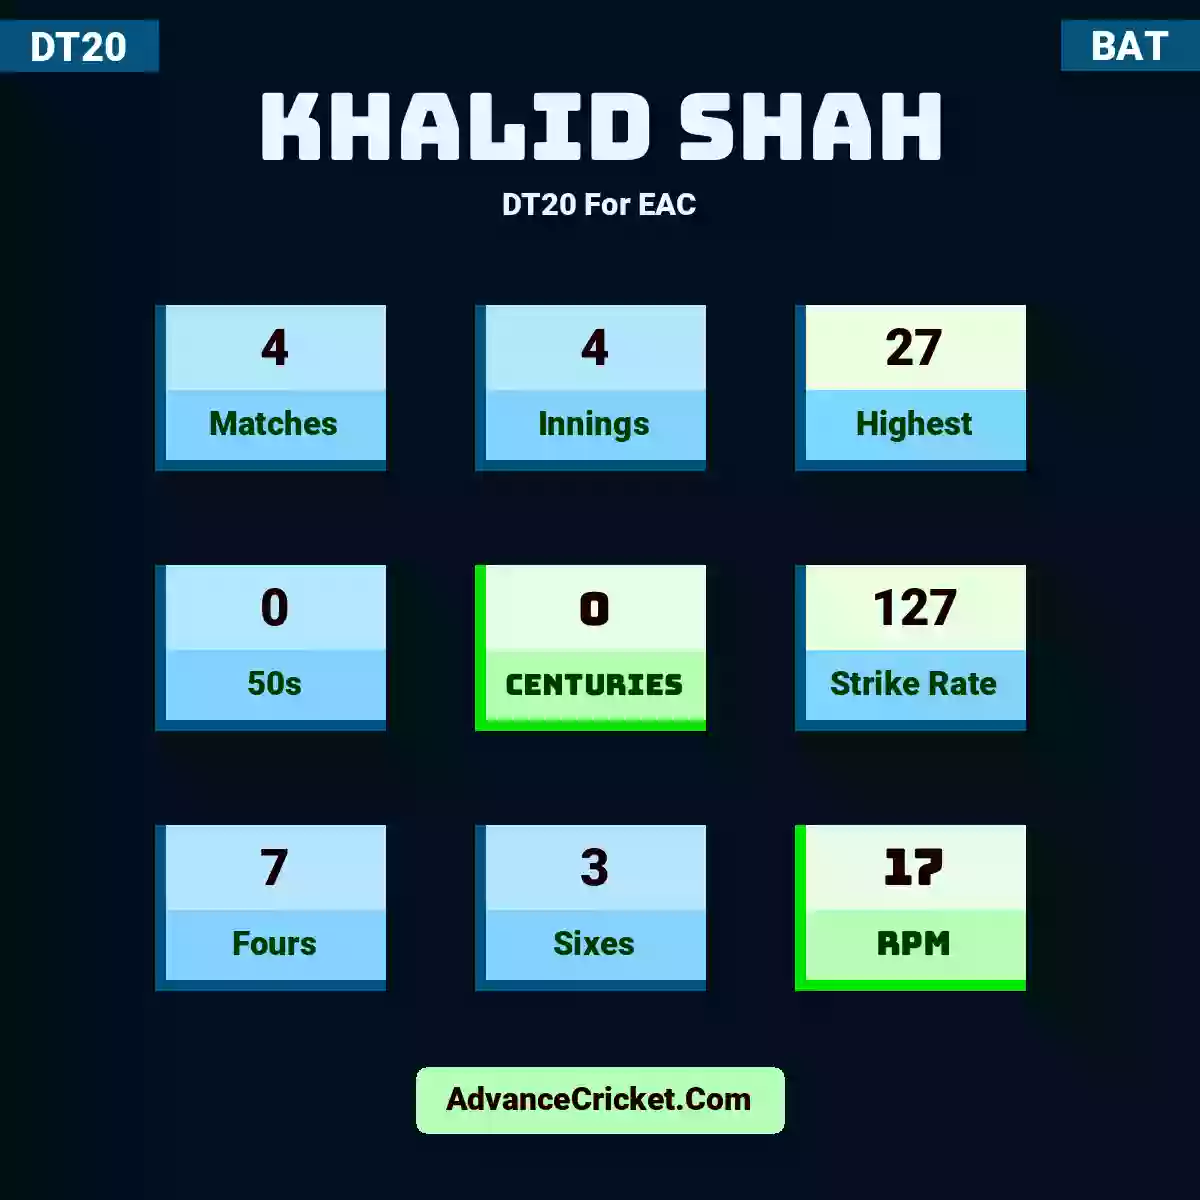 Khalid Shah DT20  For EAC, Khalid Shah played 4 matches, scored 27 runs as highest, 0 half-centuries, and 0 centuries, with a strike rate of 127. K.Shah hit 7 fours and 3 sixes, with an RPM of 17.